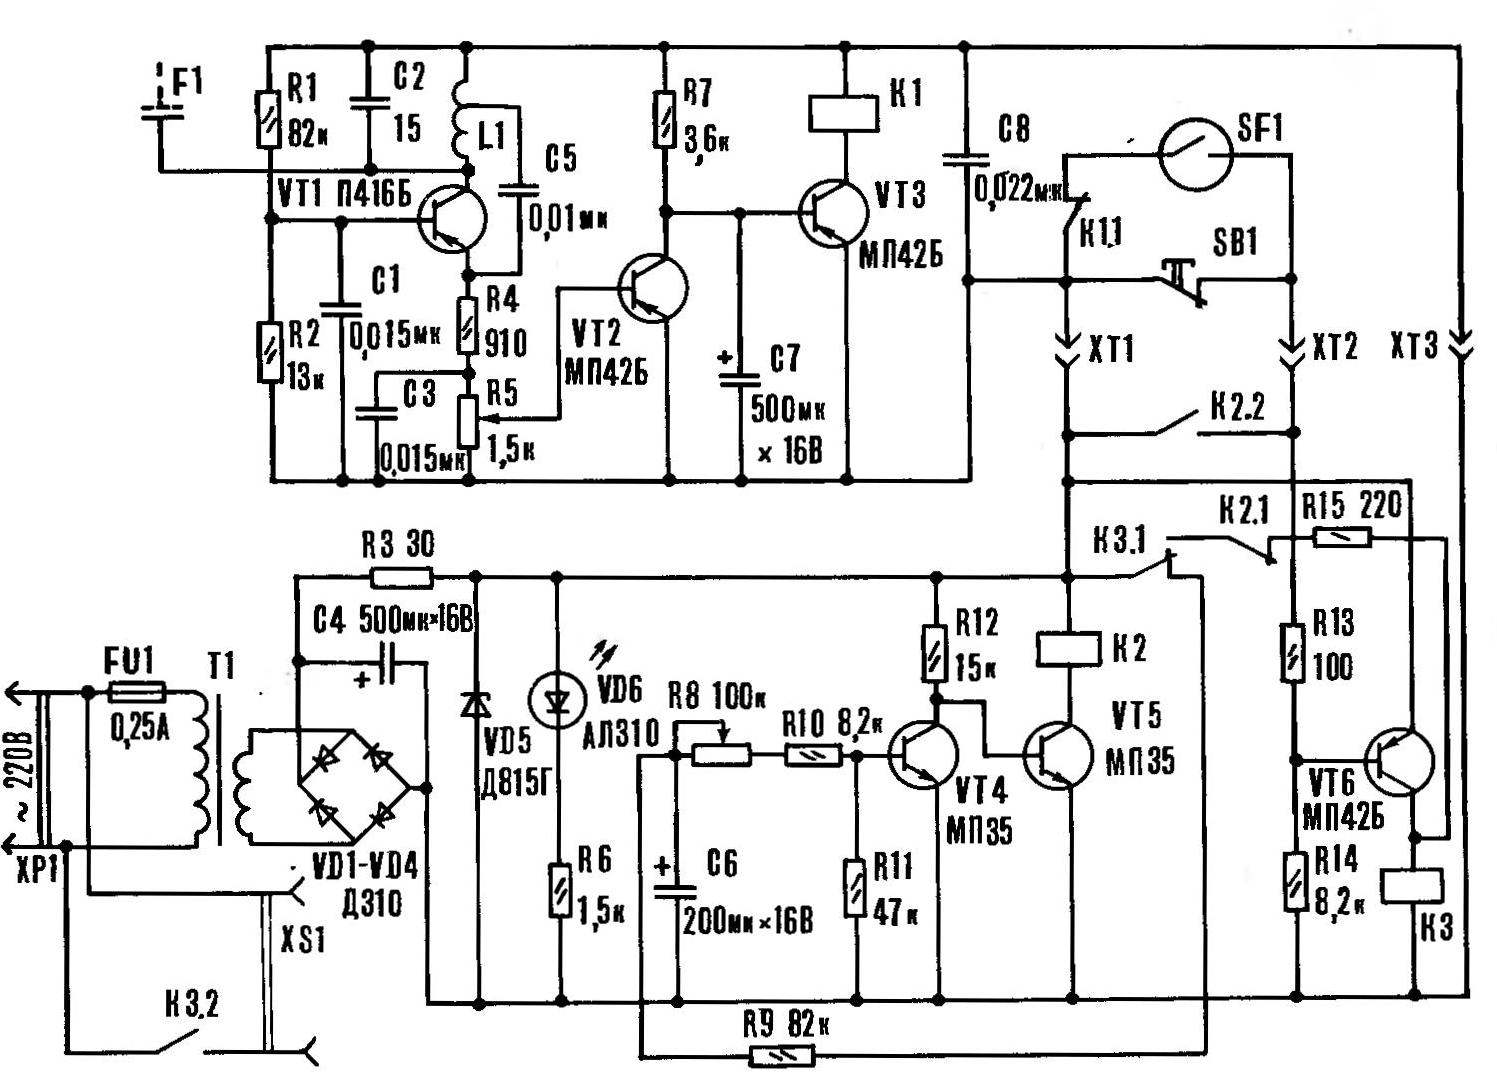 R and C. I. a circuit diagram of a security device